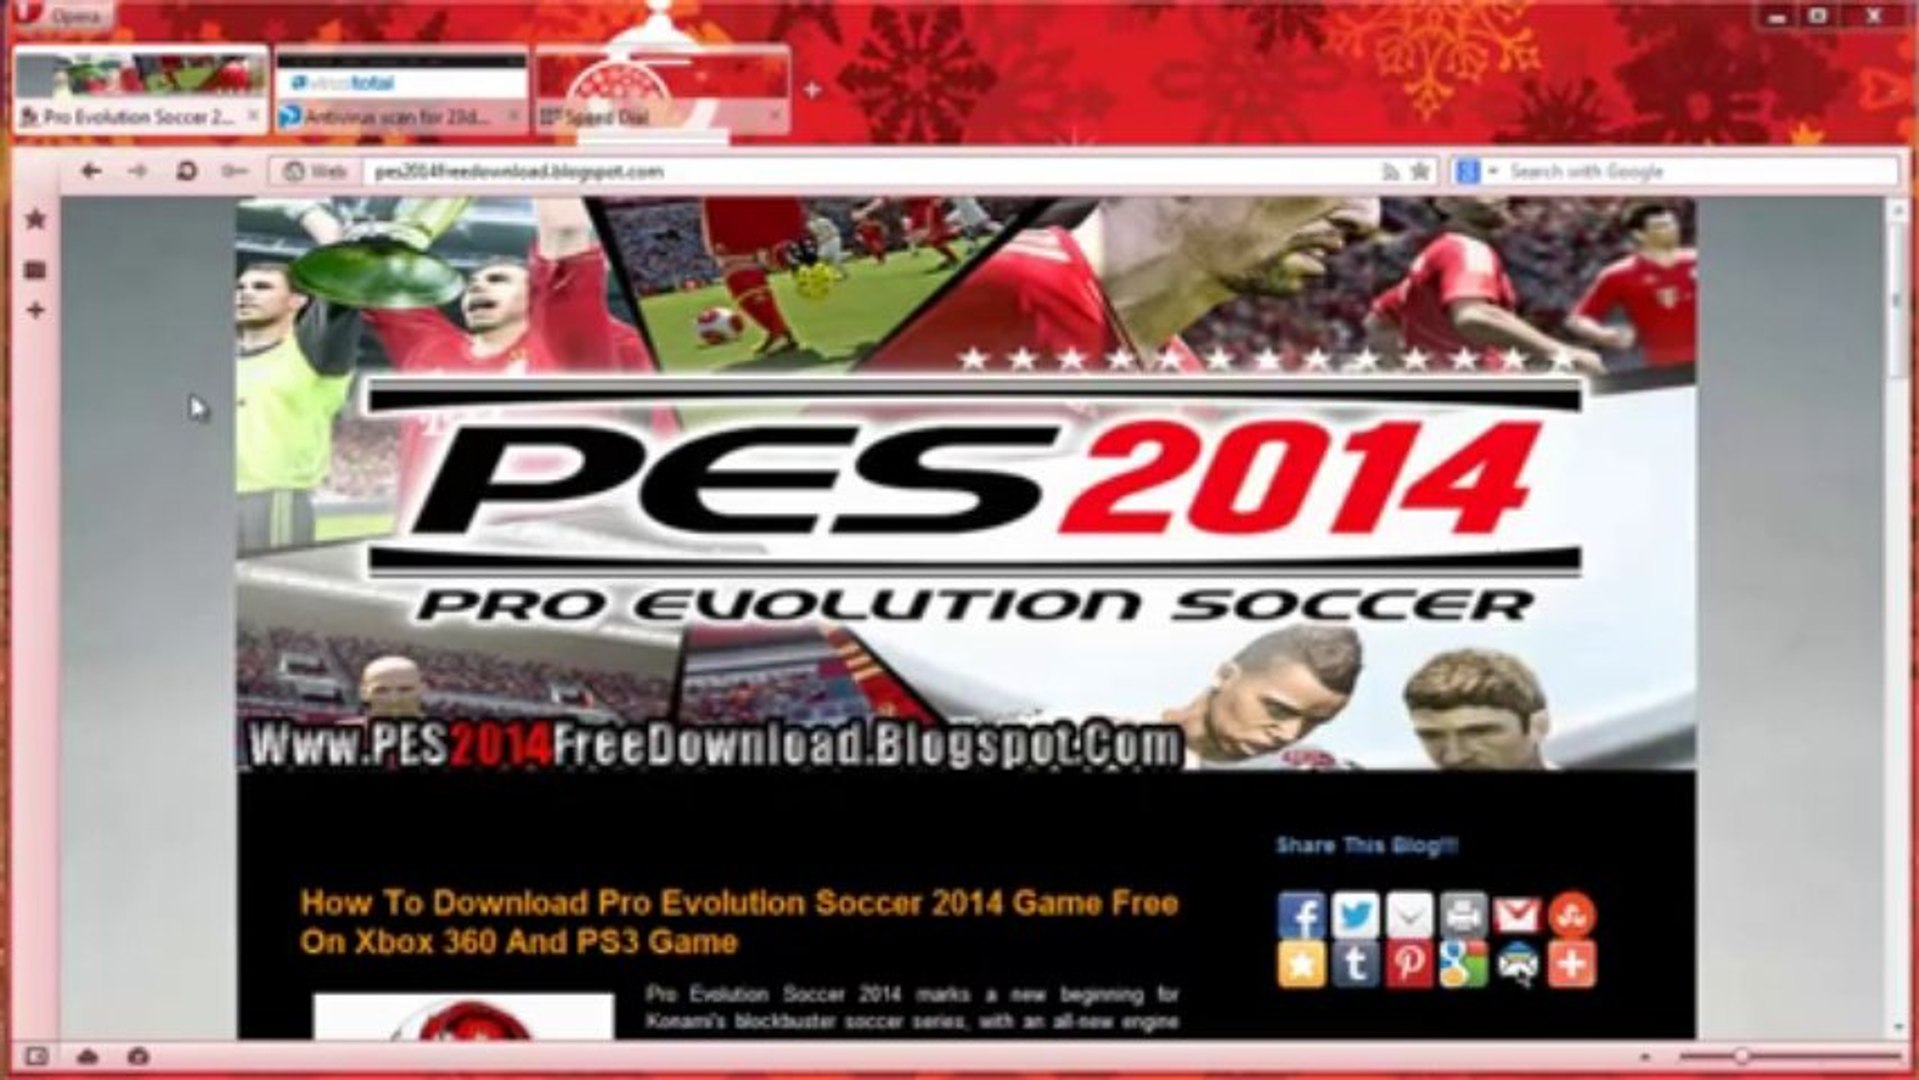 Pro Evolution Soccer 2014 Free Download DLC Xbox360-PS3 - video Dailymotion